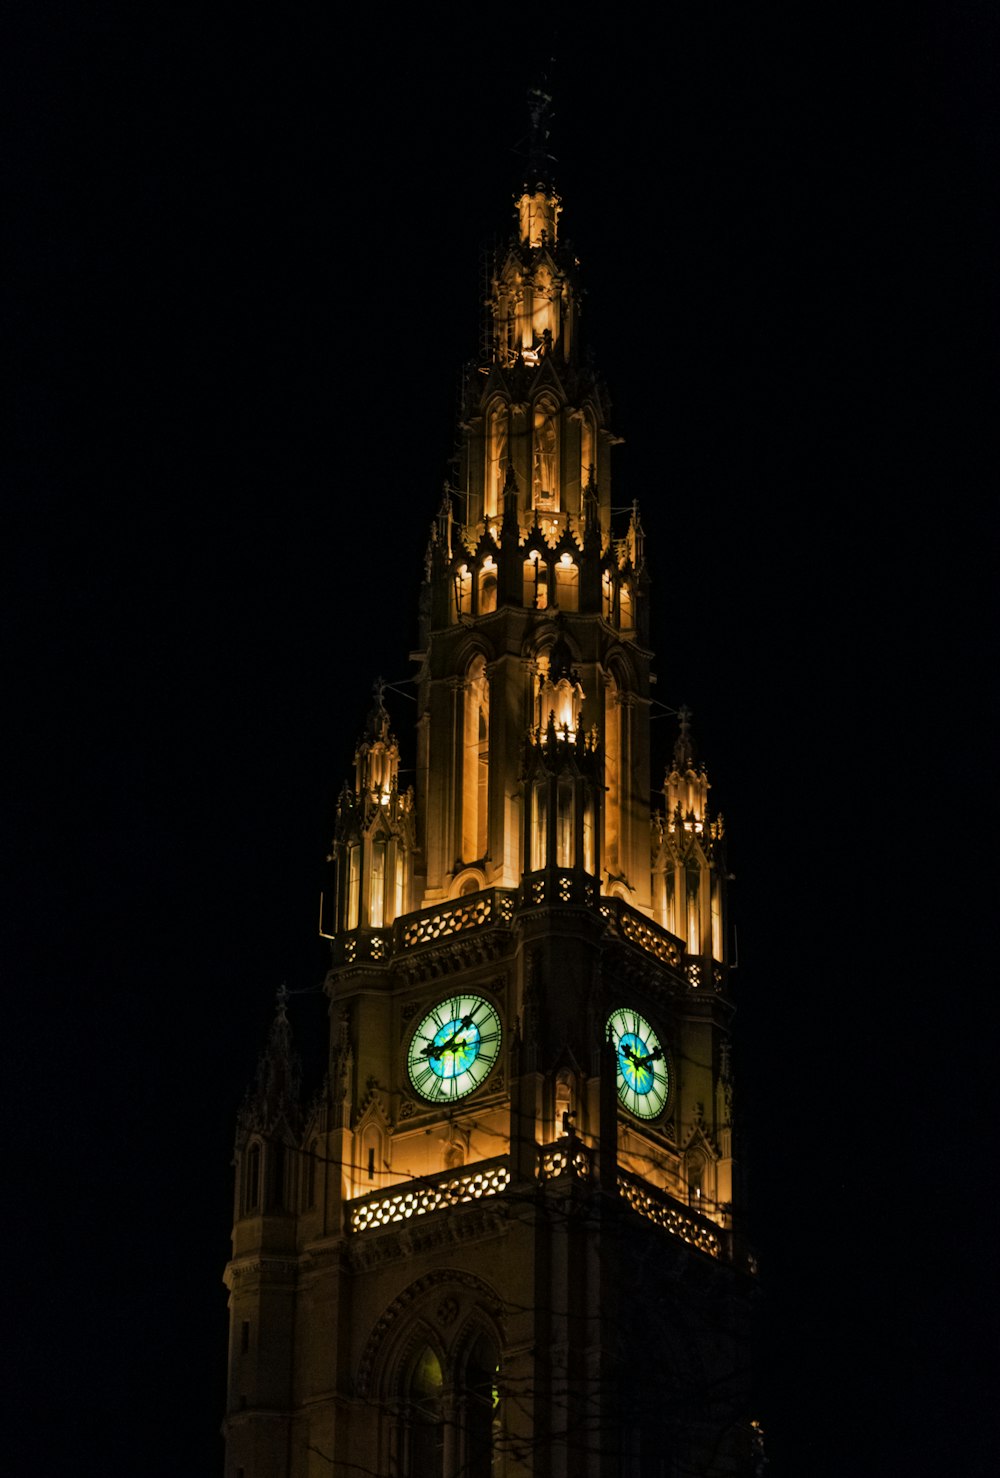 view of clock tower at night